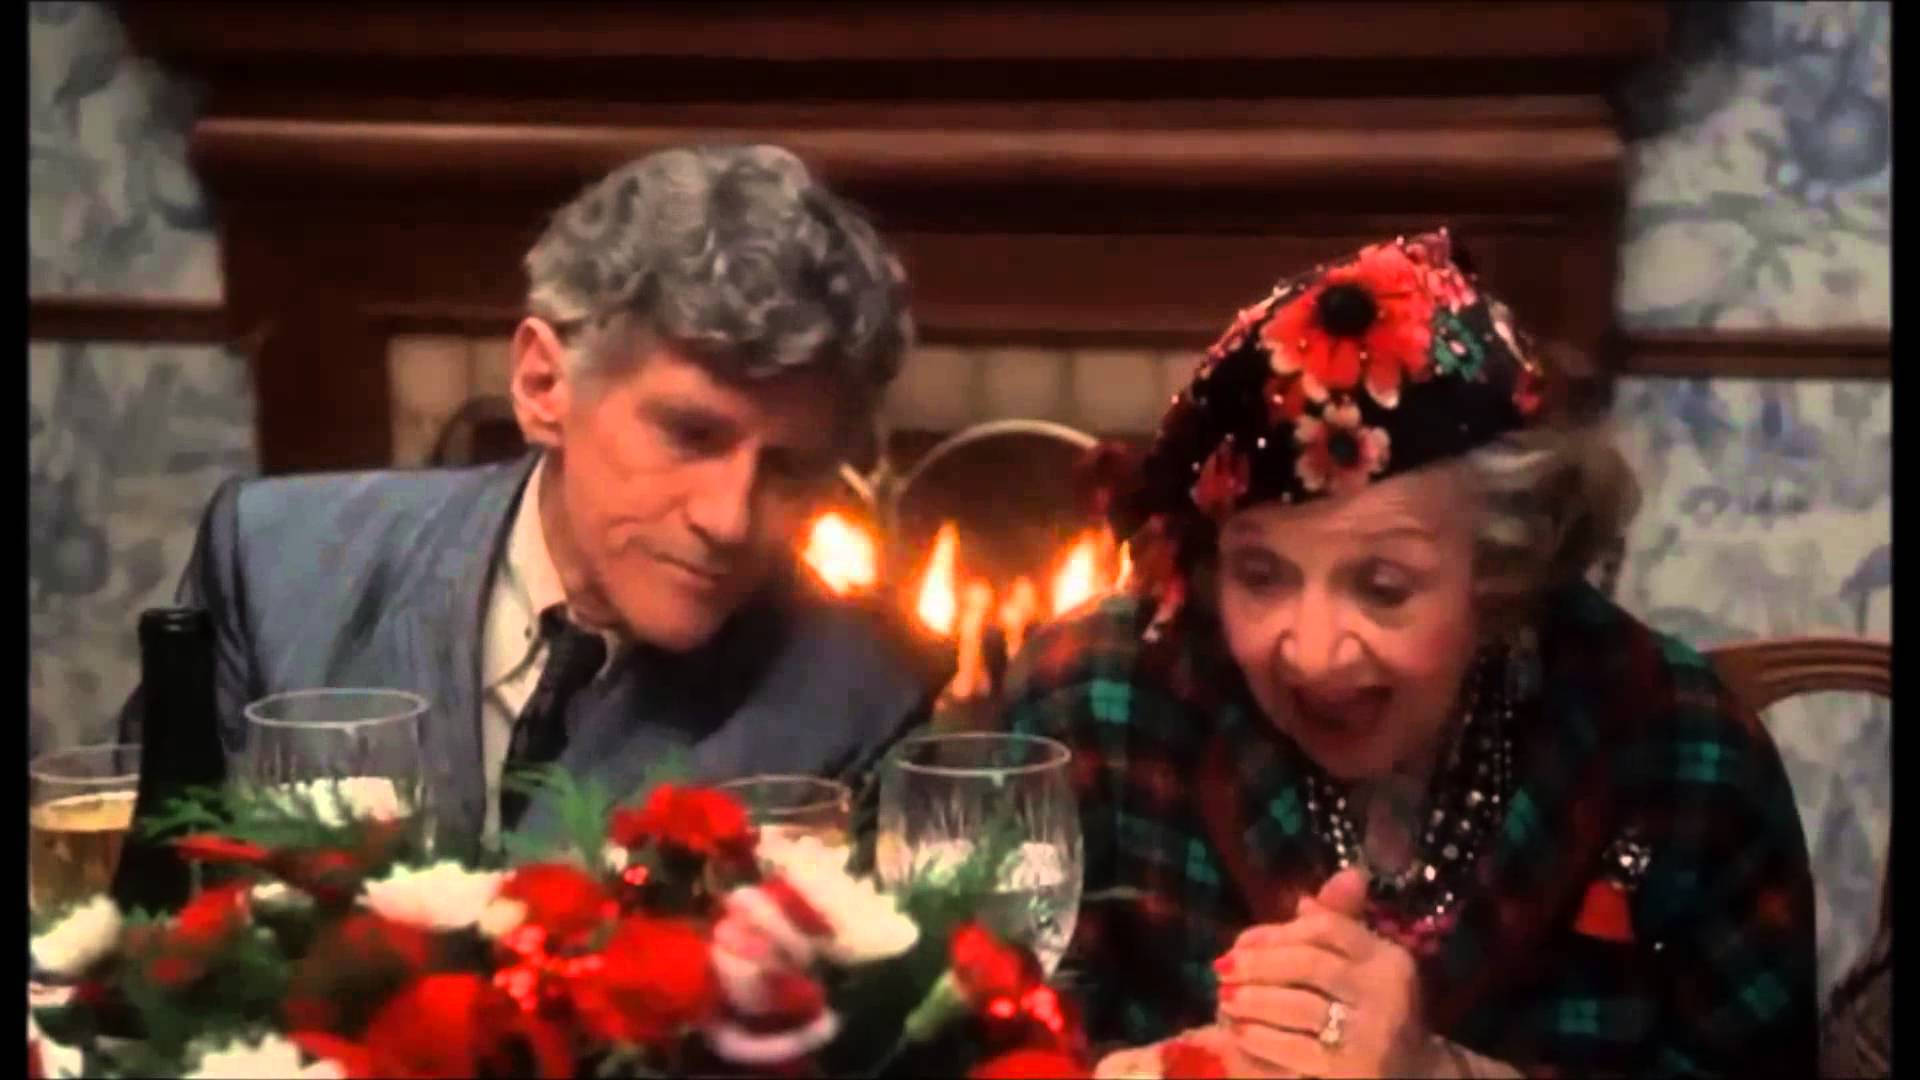 A Man And Woman Sitting At A Table With A Christmas Tree Background